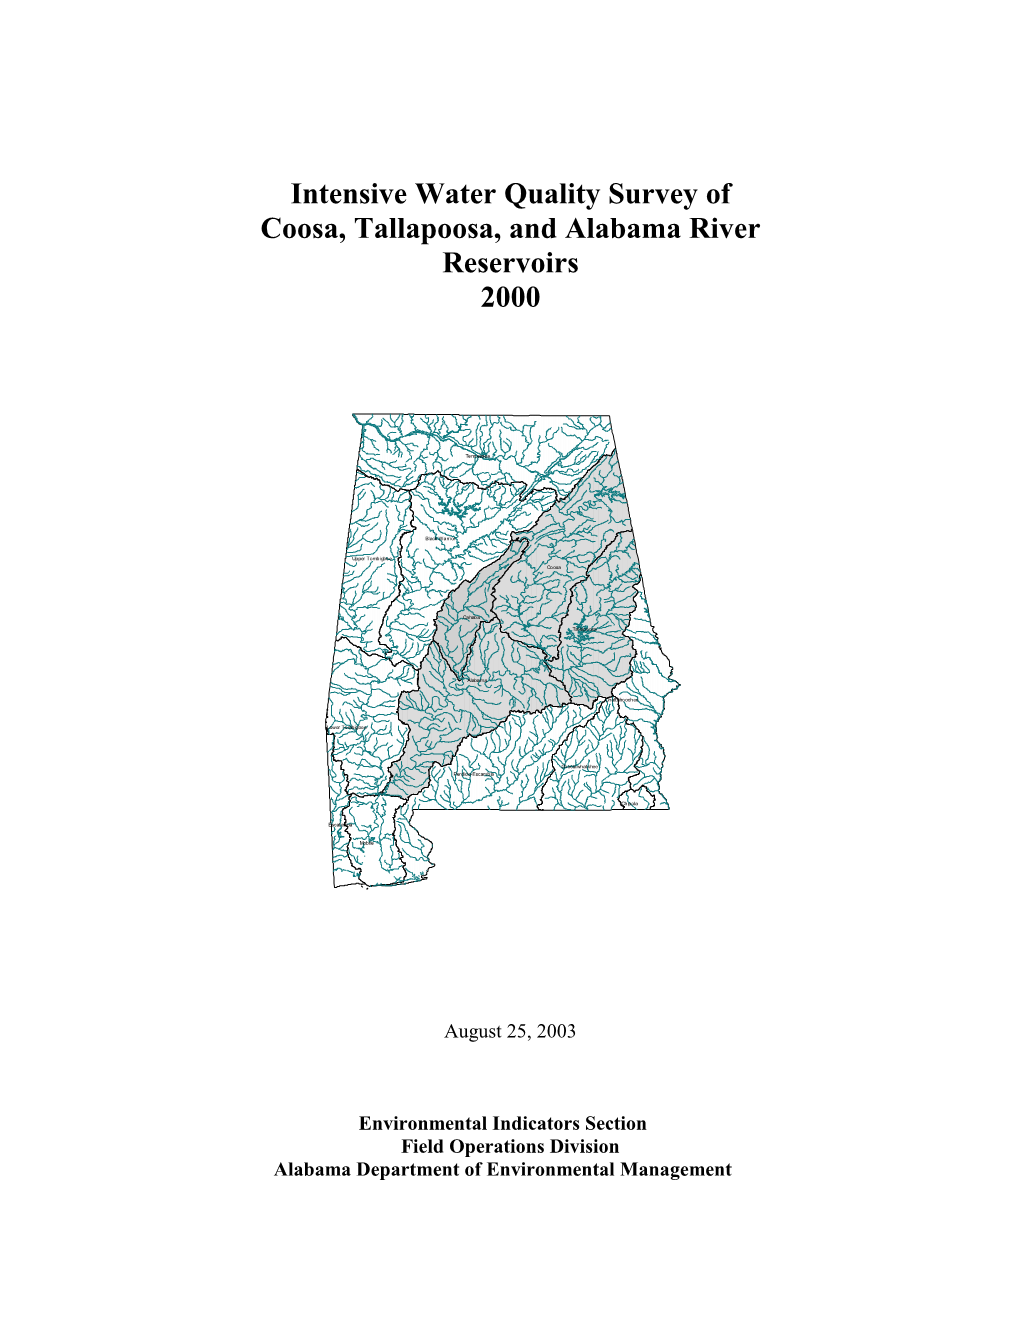 Intensive Water Quality Survey of Coosa, Tallapoosa, and Alabama River Reservoirs 2000